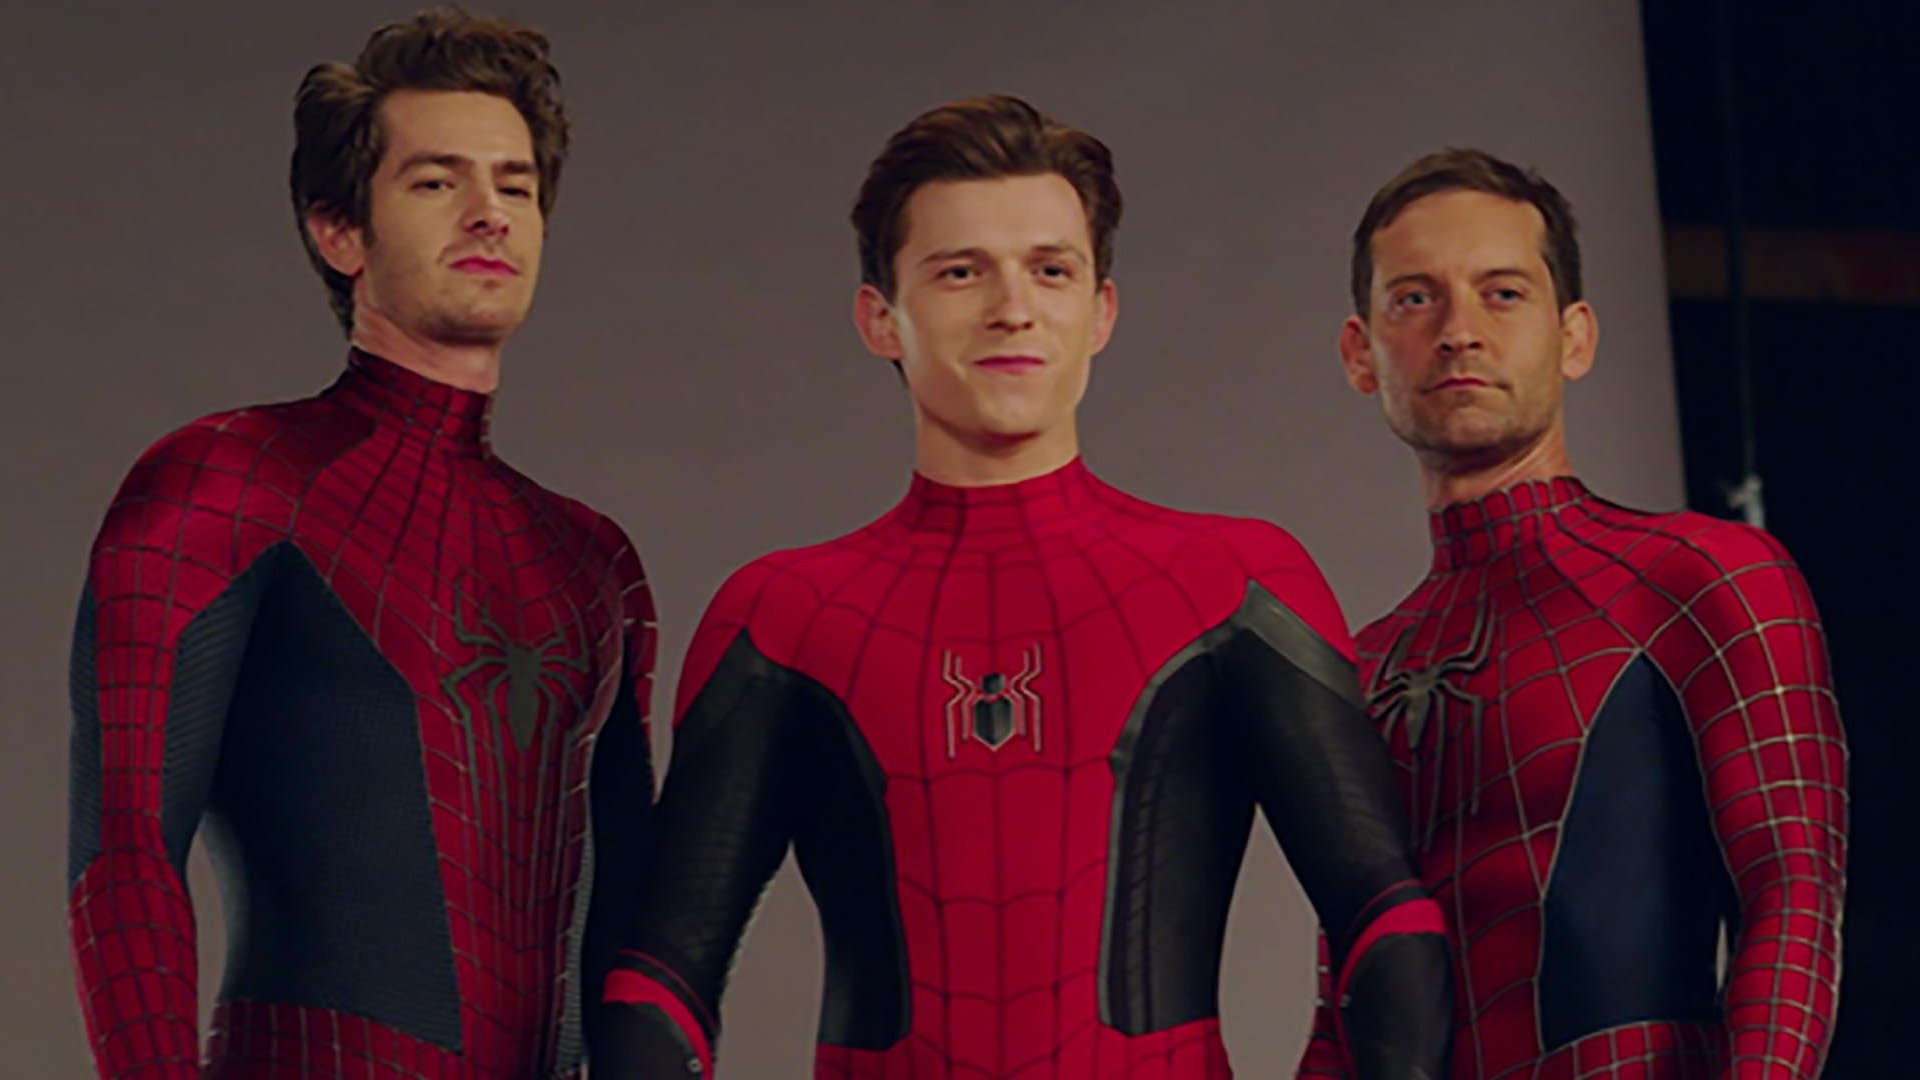 Fans Buzz Over Spider-Man: Sony Plans New Adventures for Maguire and Garfield Without Tom Holland